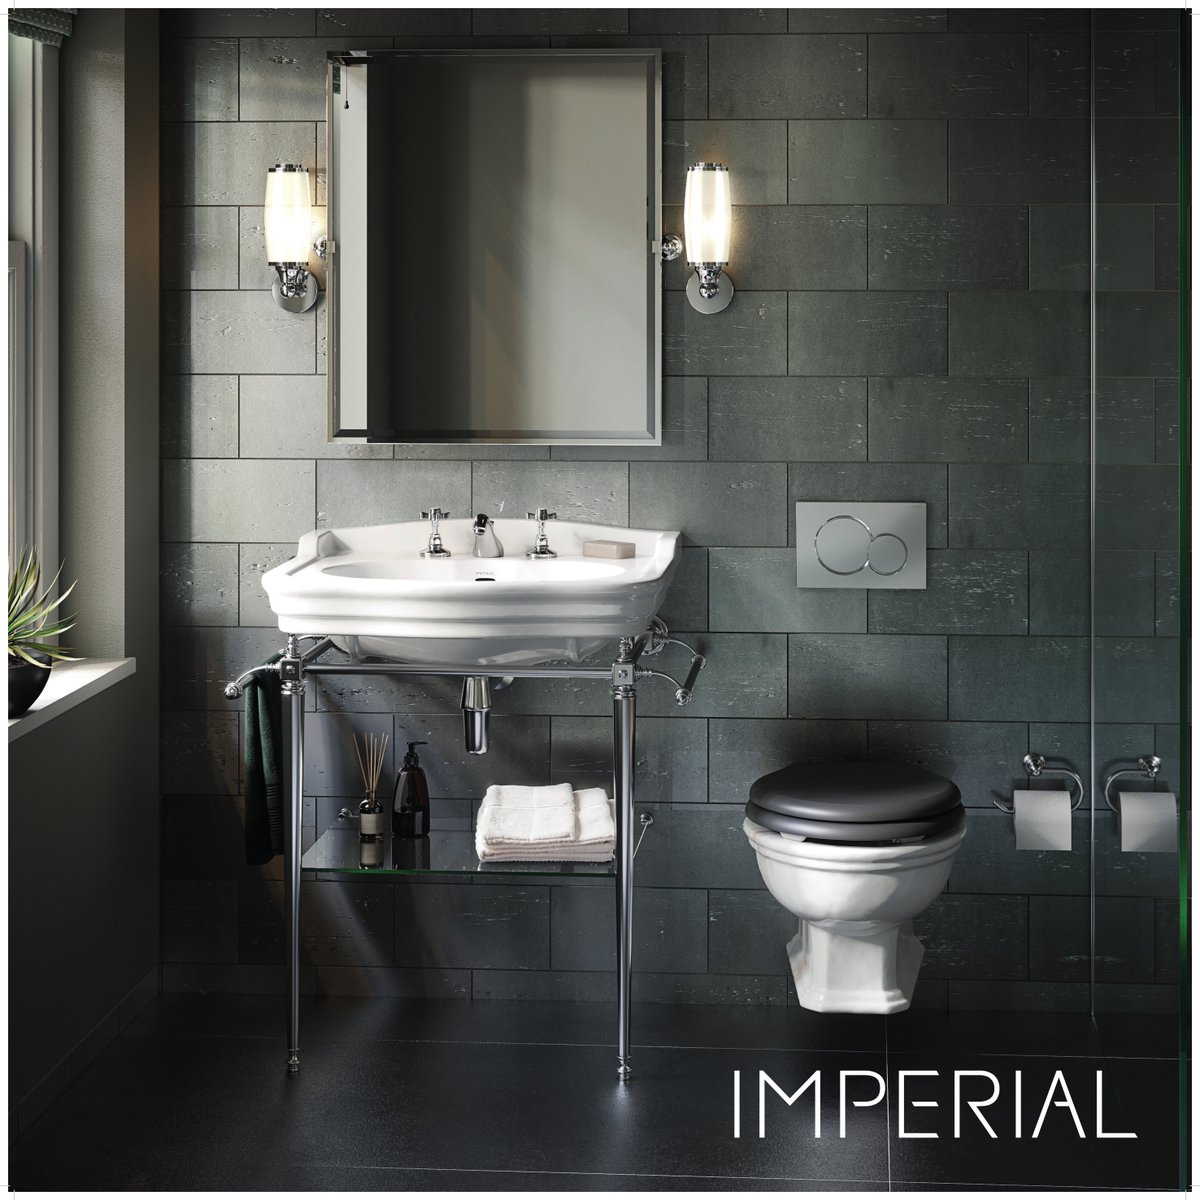 Our chrome Hampton Basin stand for use with the new Regent large basin adds the ultimate finishing touch to a boutique style bathroom #boutique #style #regent #chrome #luxury #imperialbathrooms imperial-bathrooms.co.uk